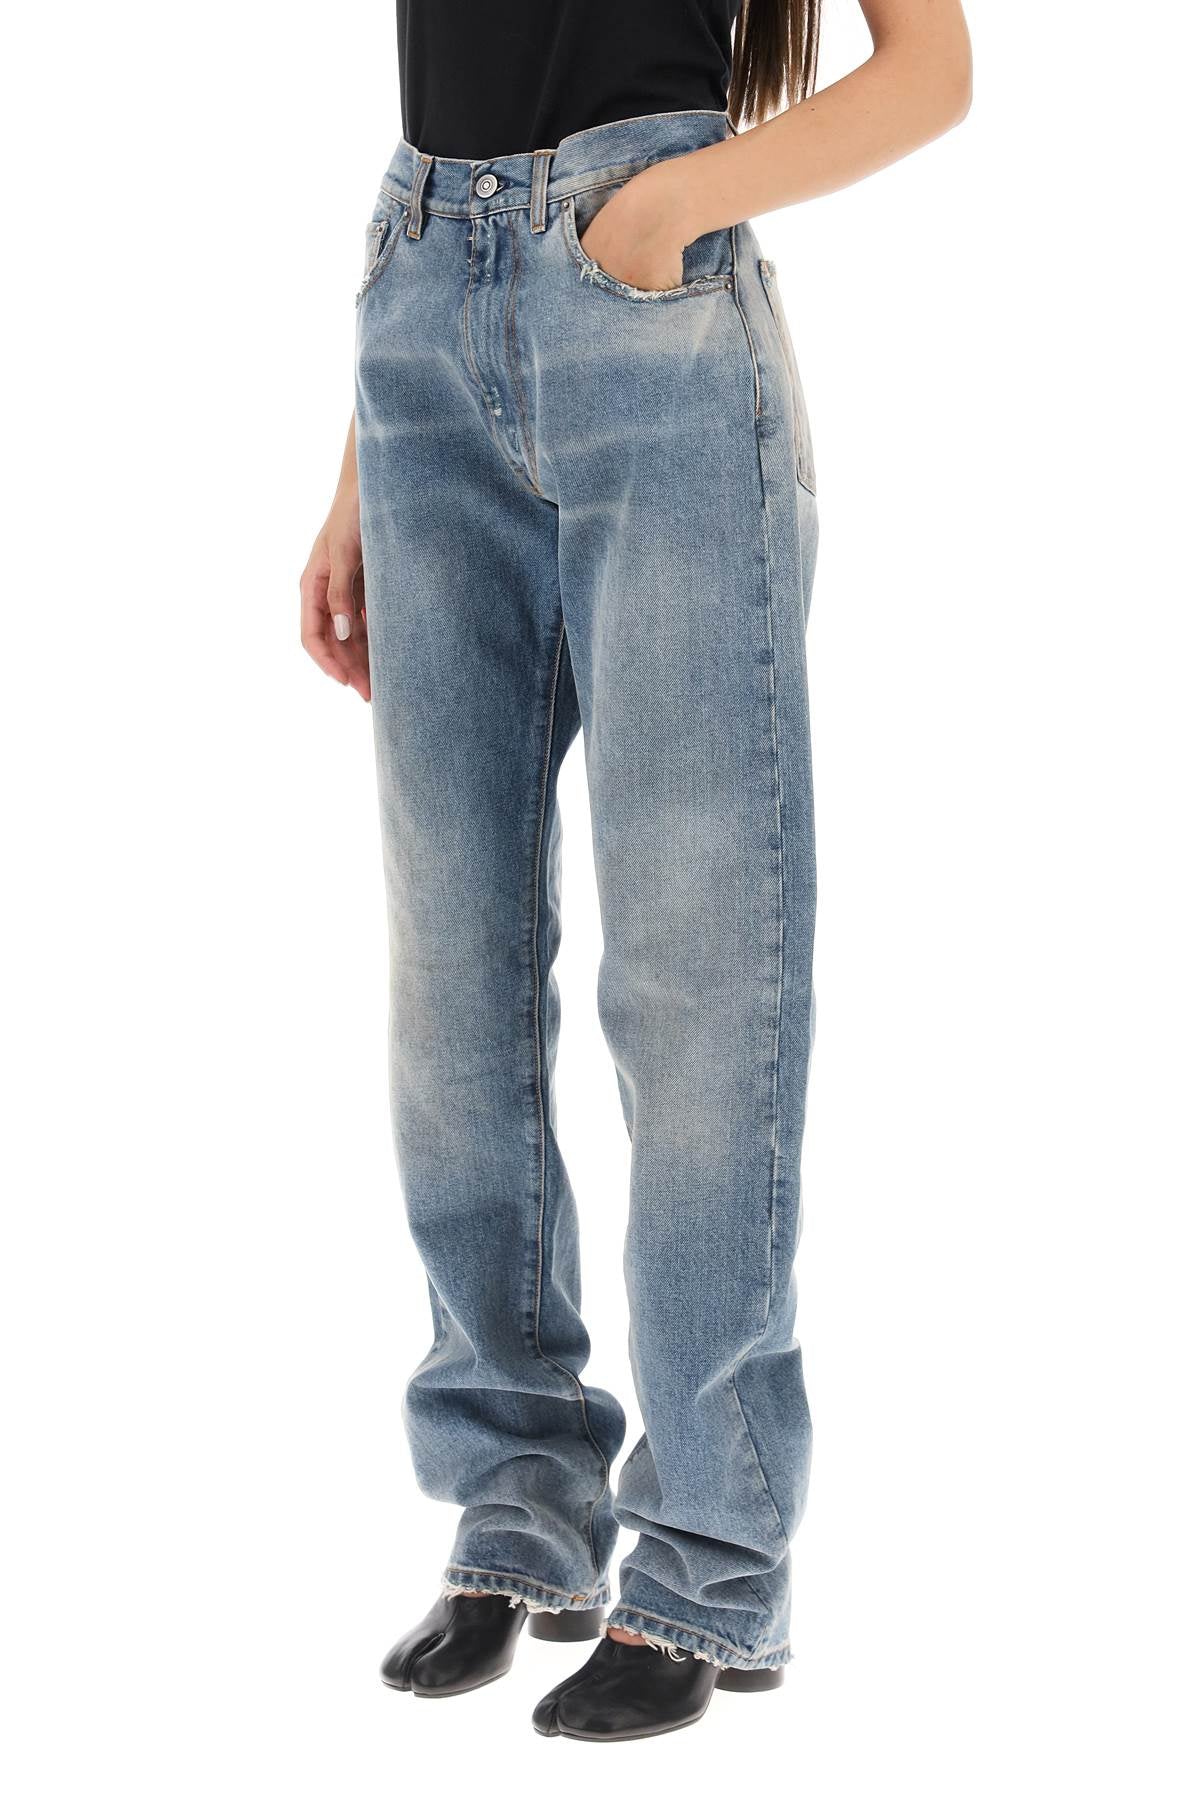  Maison margiela loose jeans with straight cut